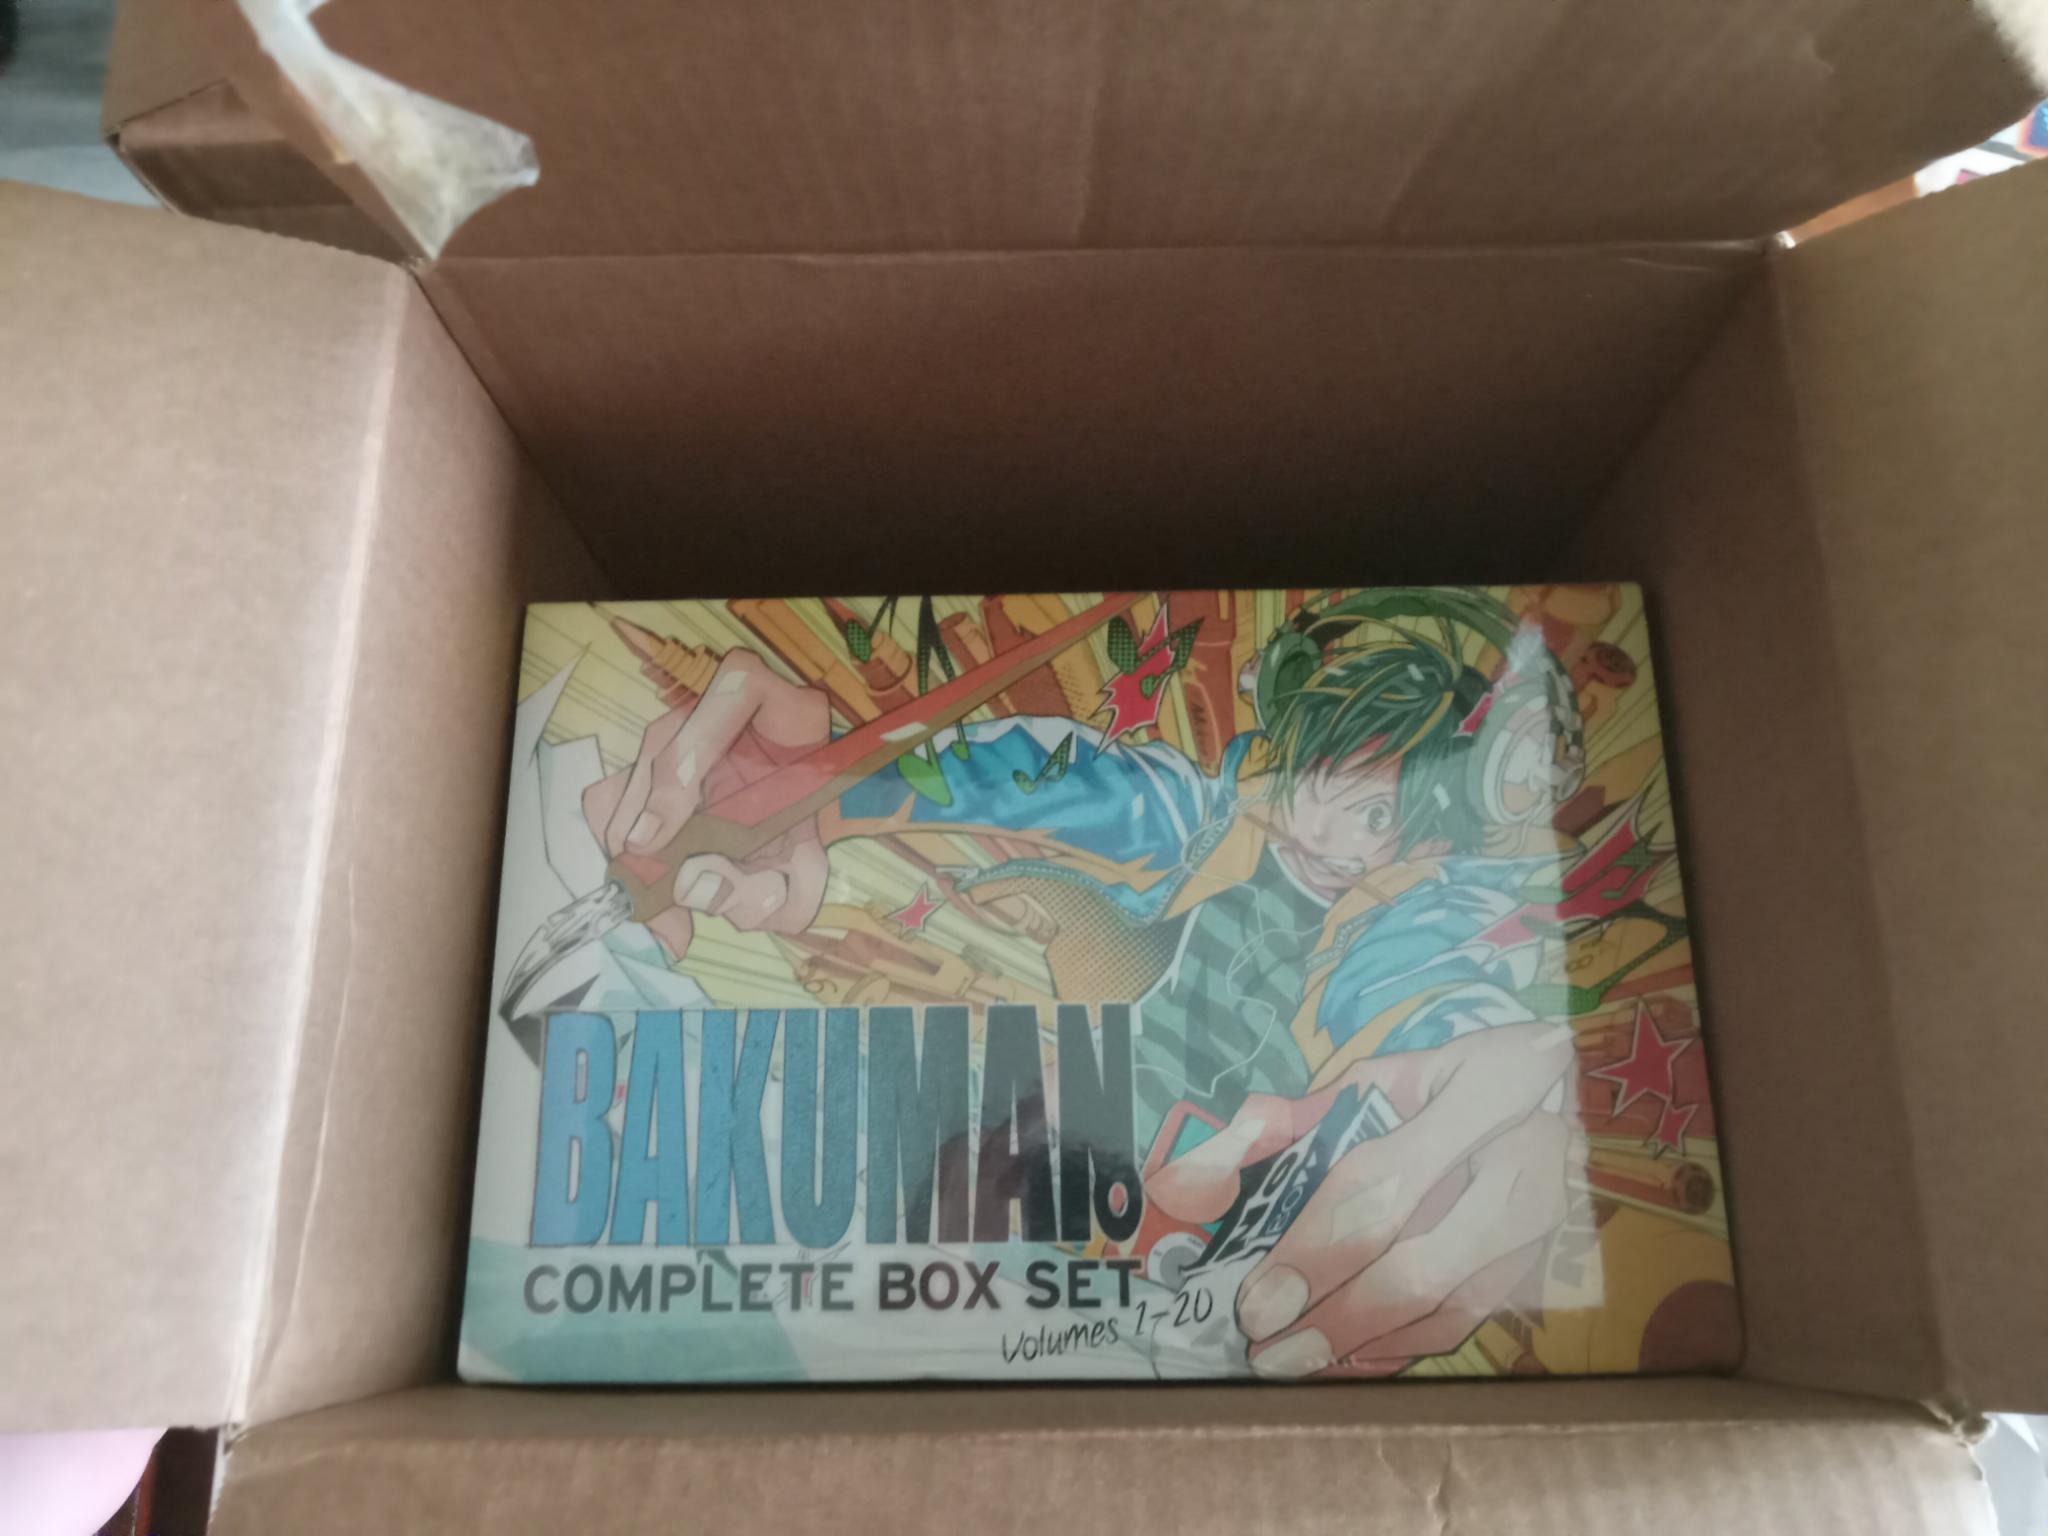 My Bakuman Manga Box Set Unboxing After 7 Years of Begging For It